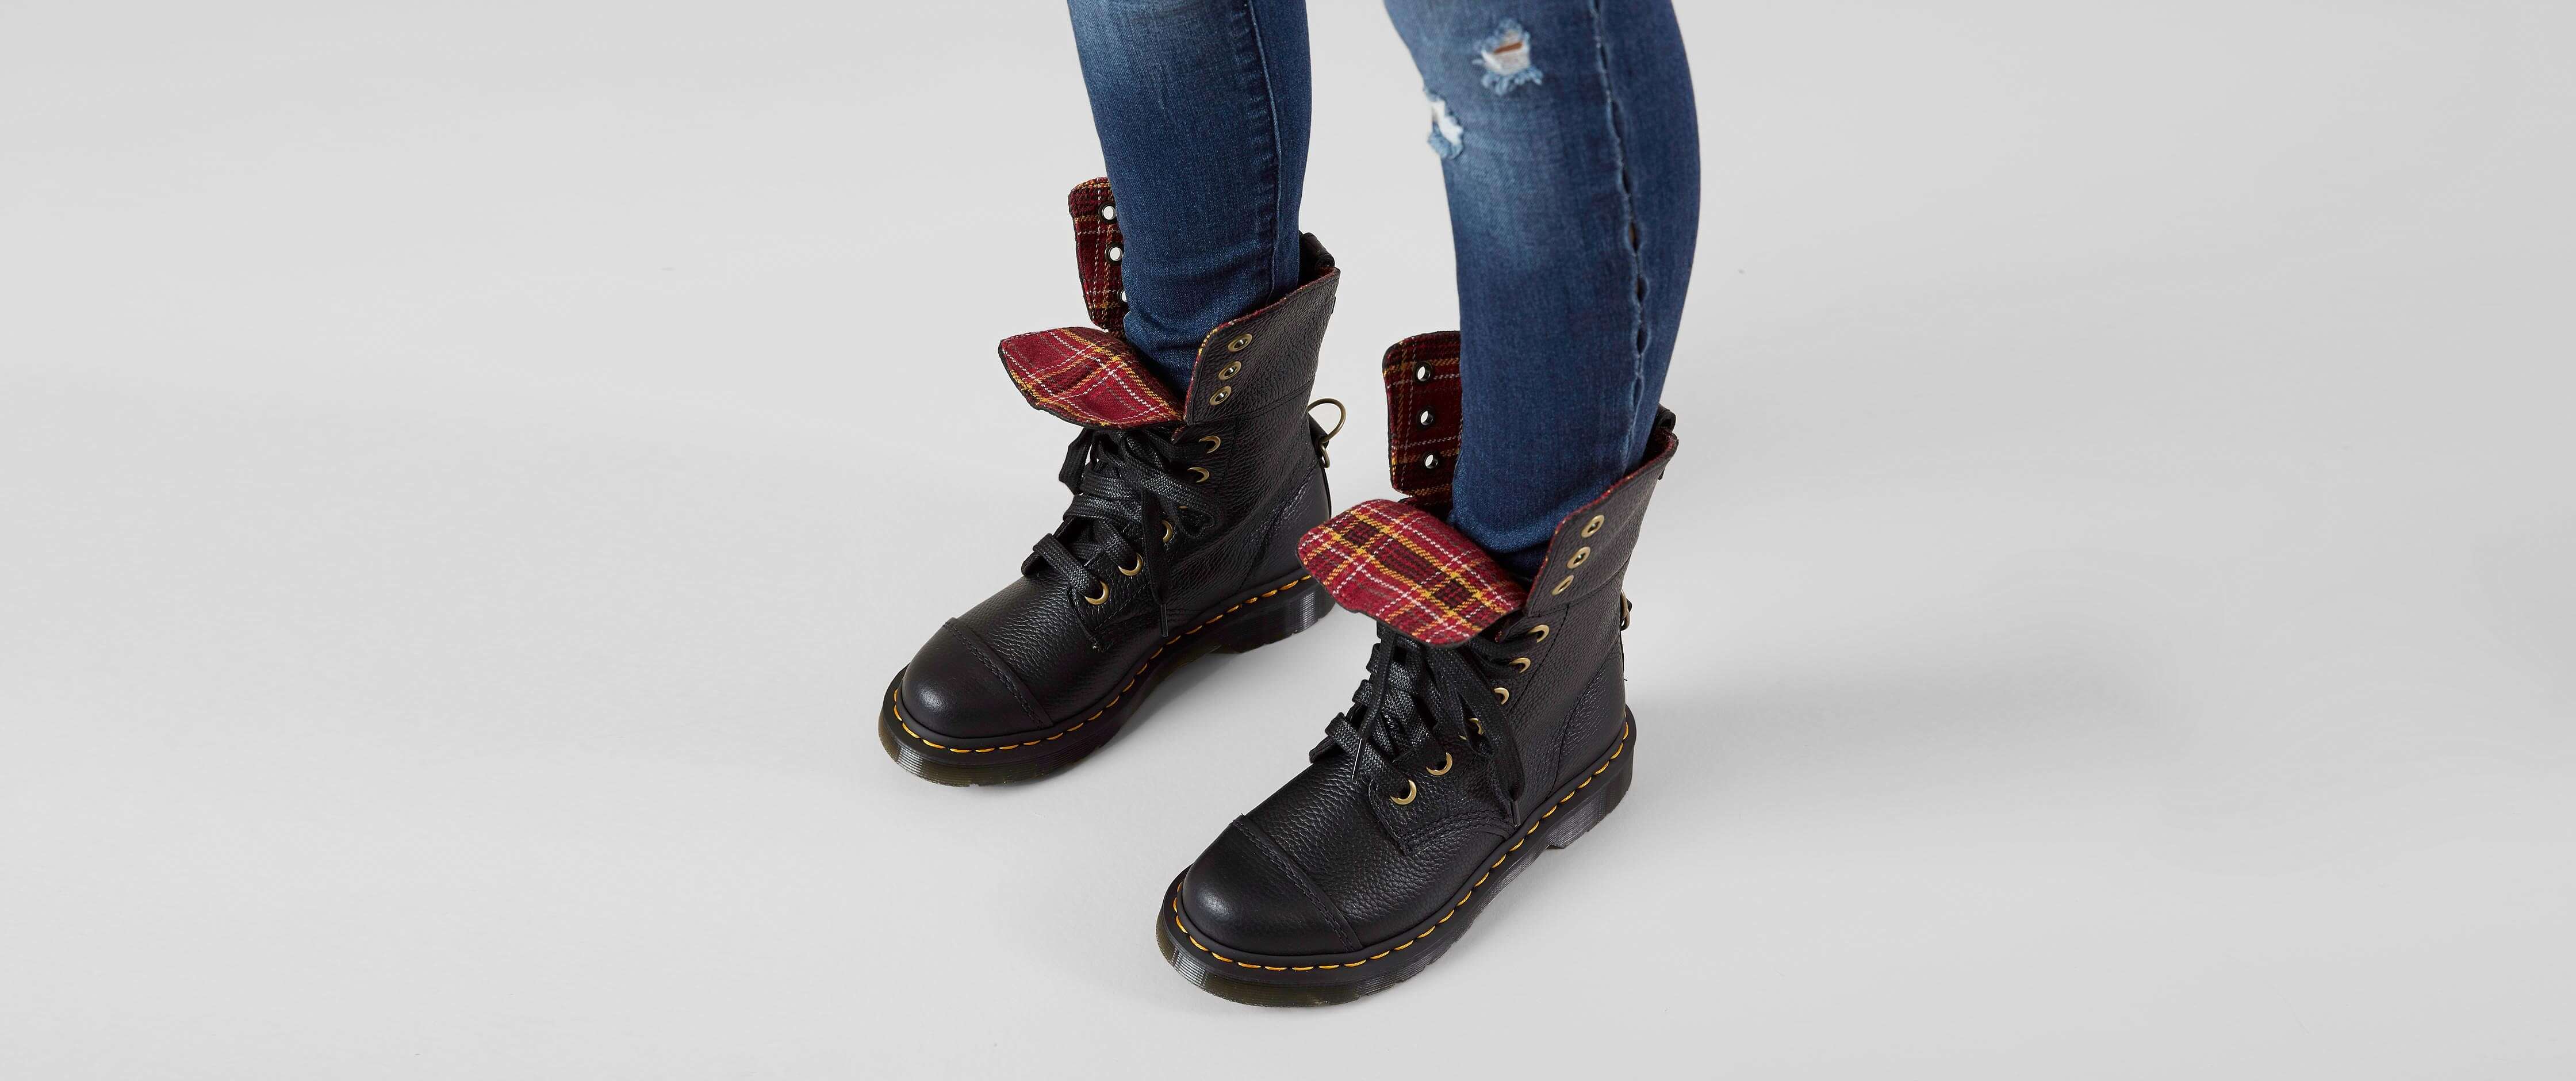 aunt sally boots